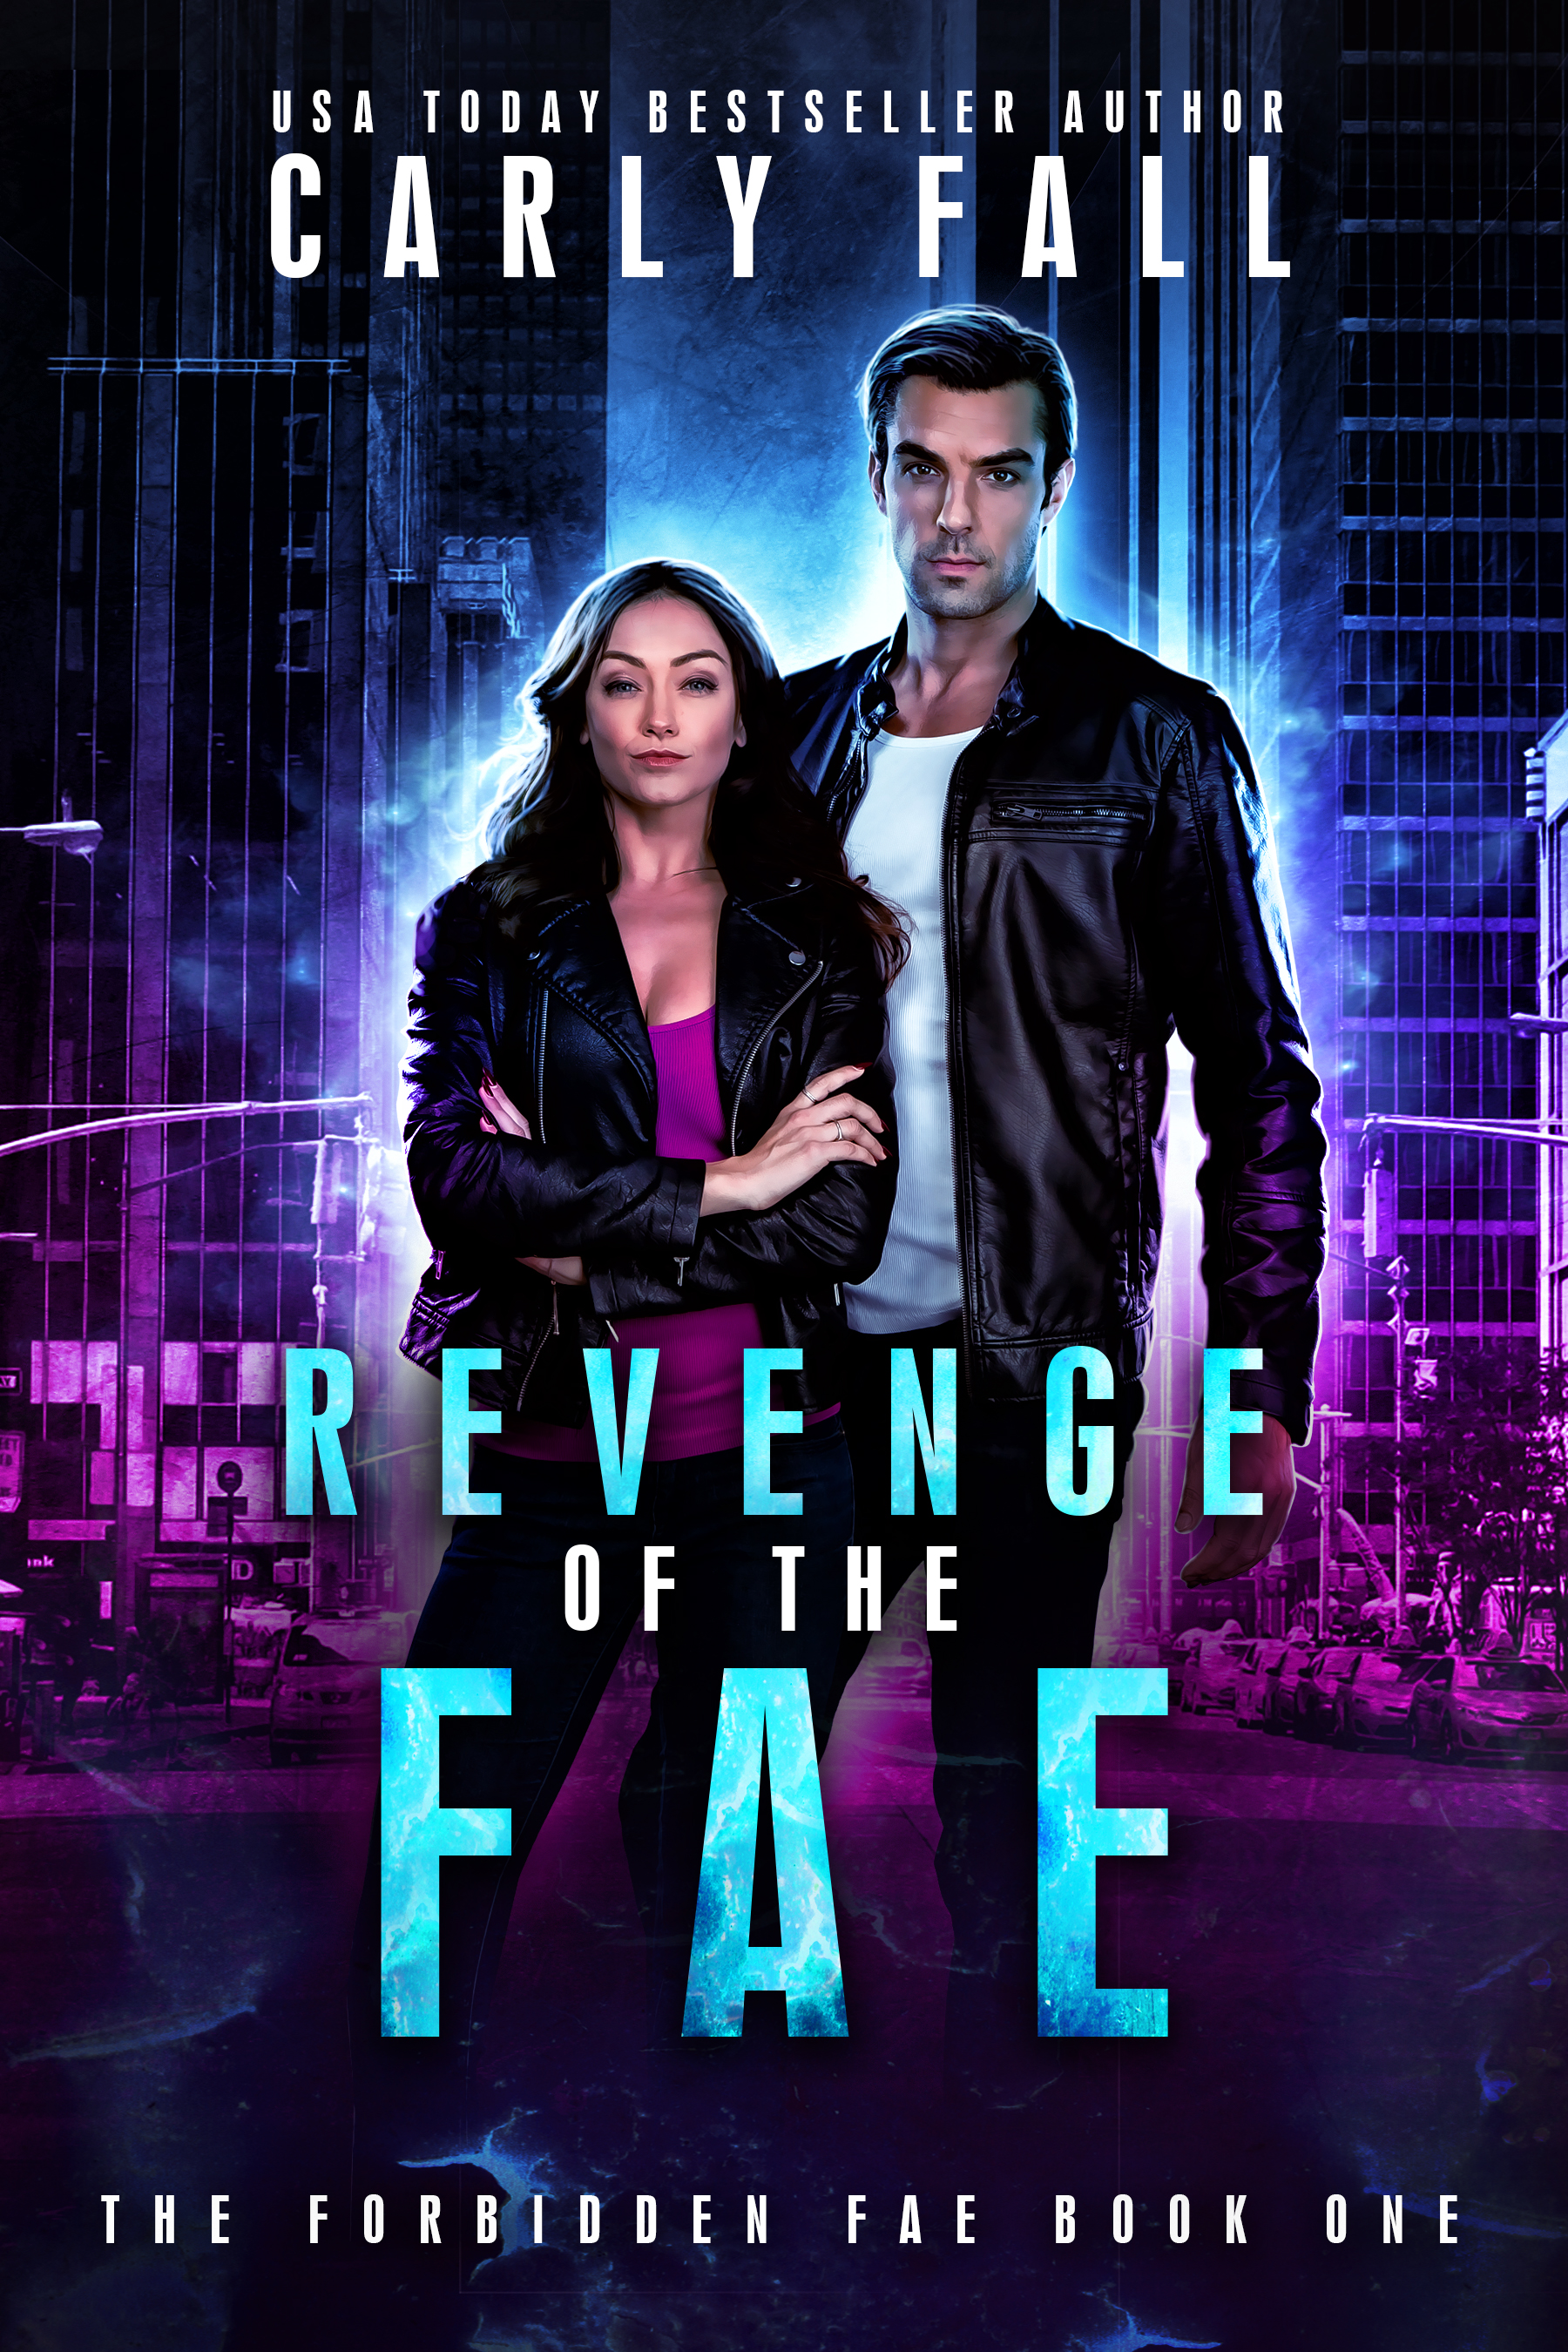 Revenge of the Fae (Book 1 of the Forbidden Fae Series)